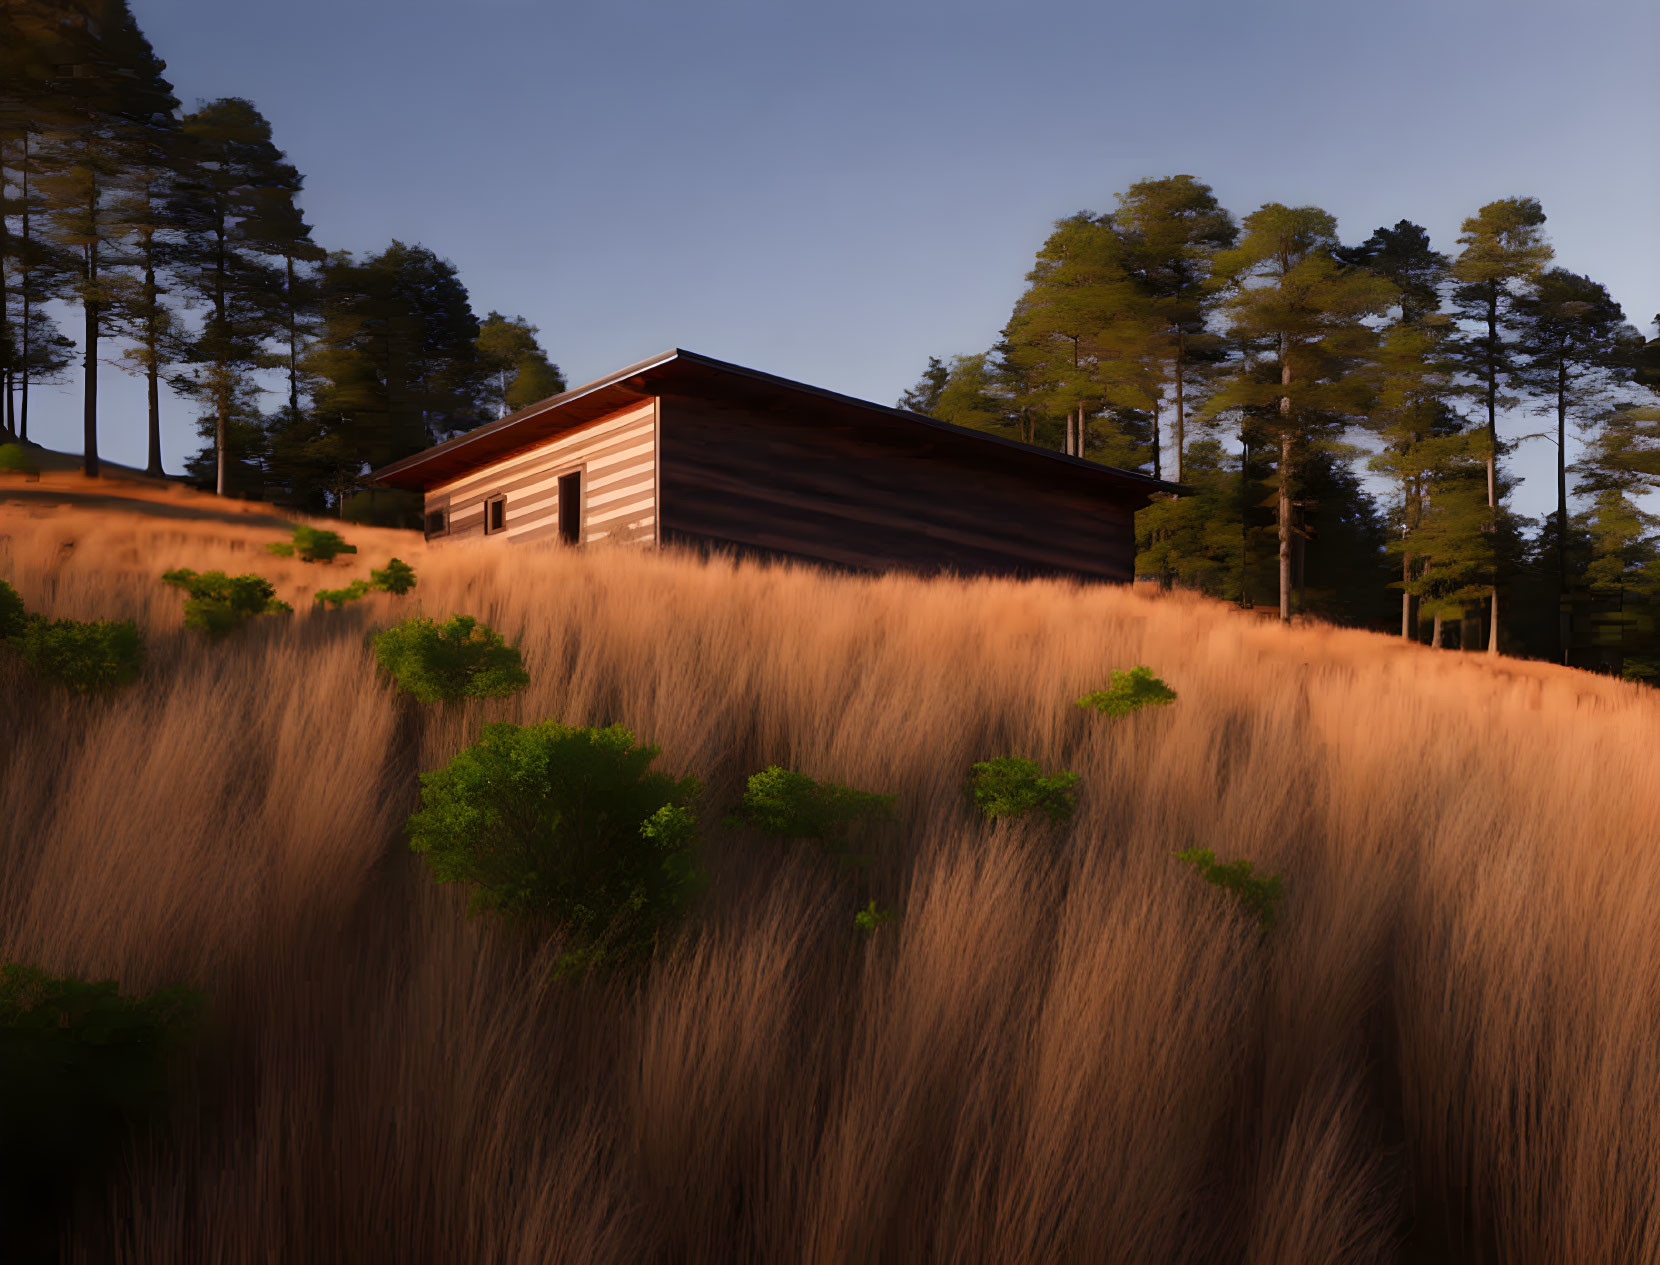 Small wooden cabin on a hill.